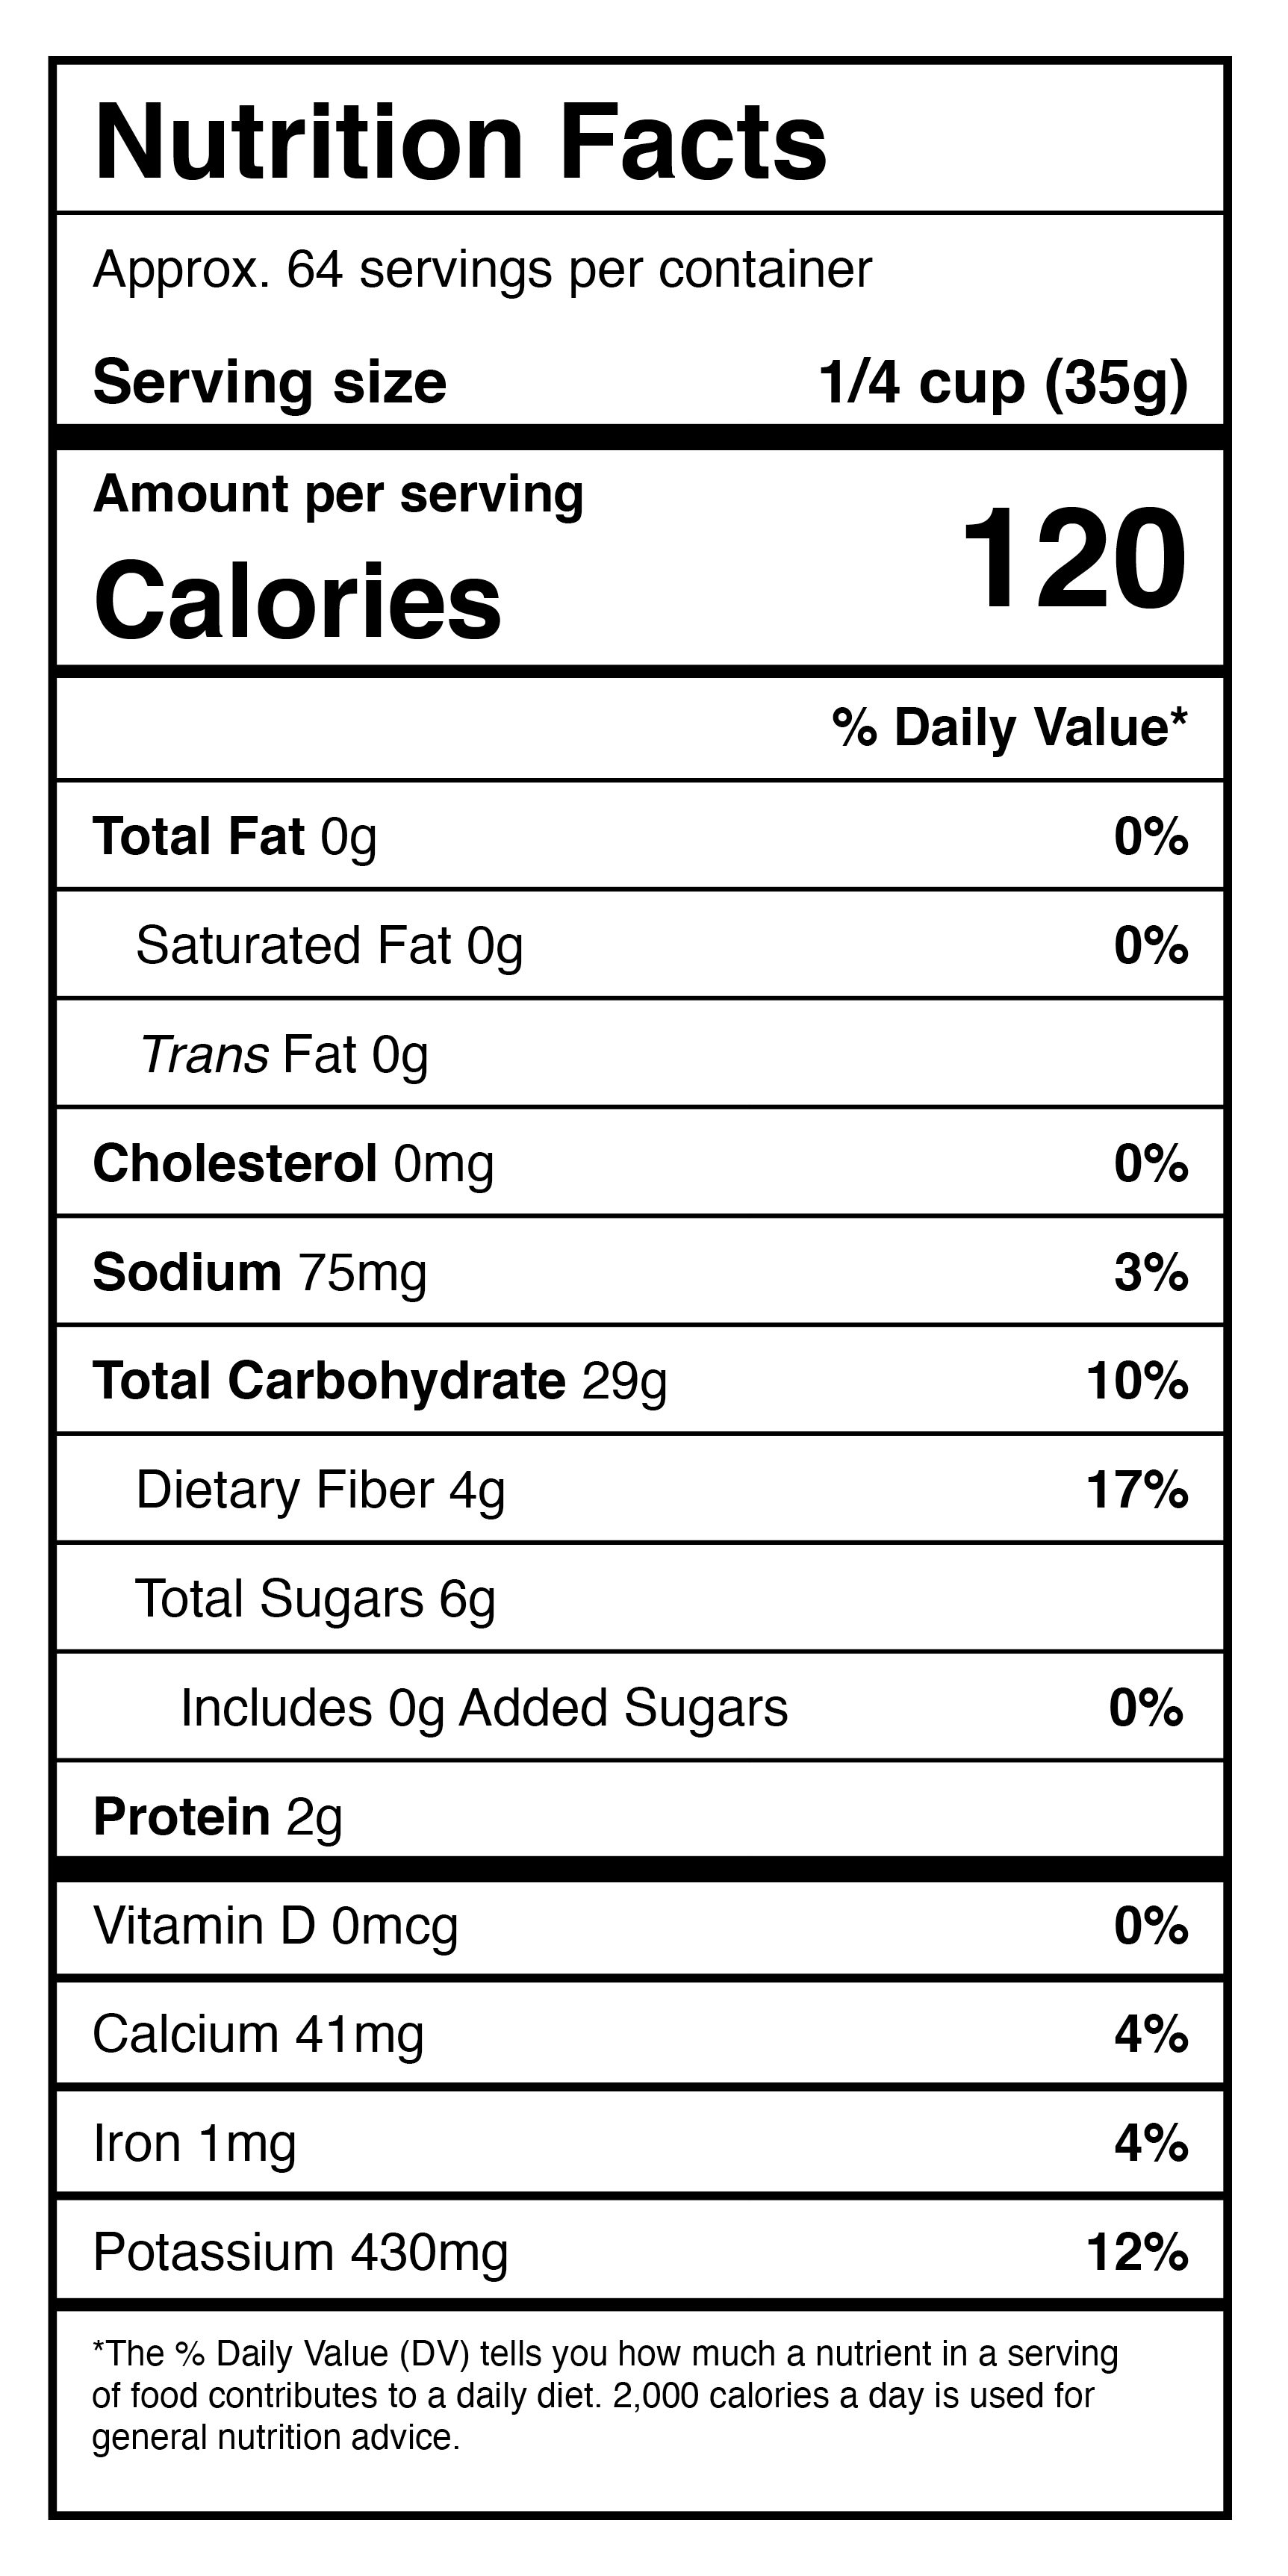 A nutrition label showing the nutrition facts of Harmony House Dried Sweet Potatoes.